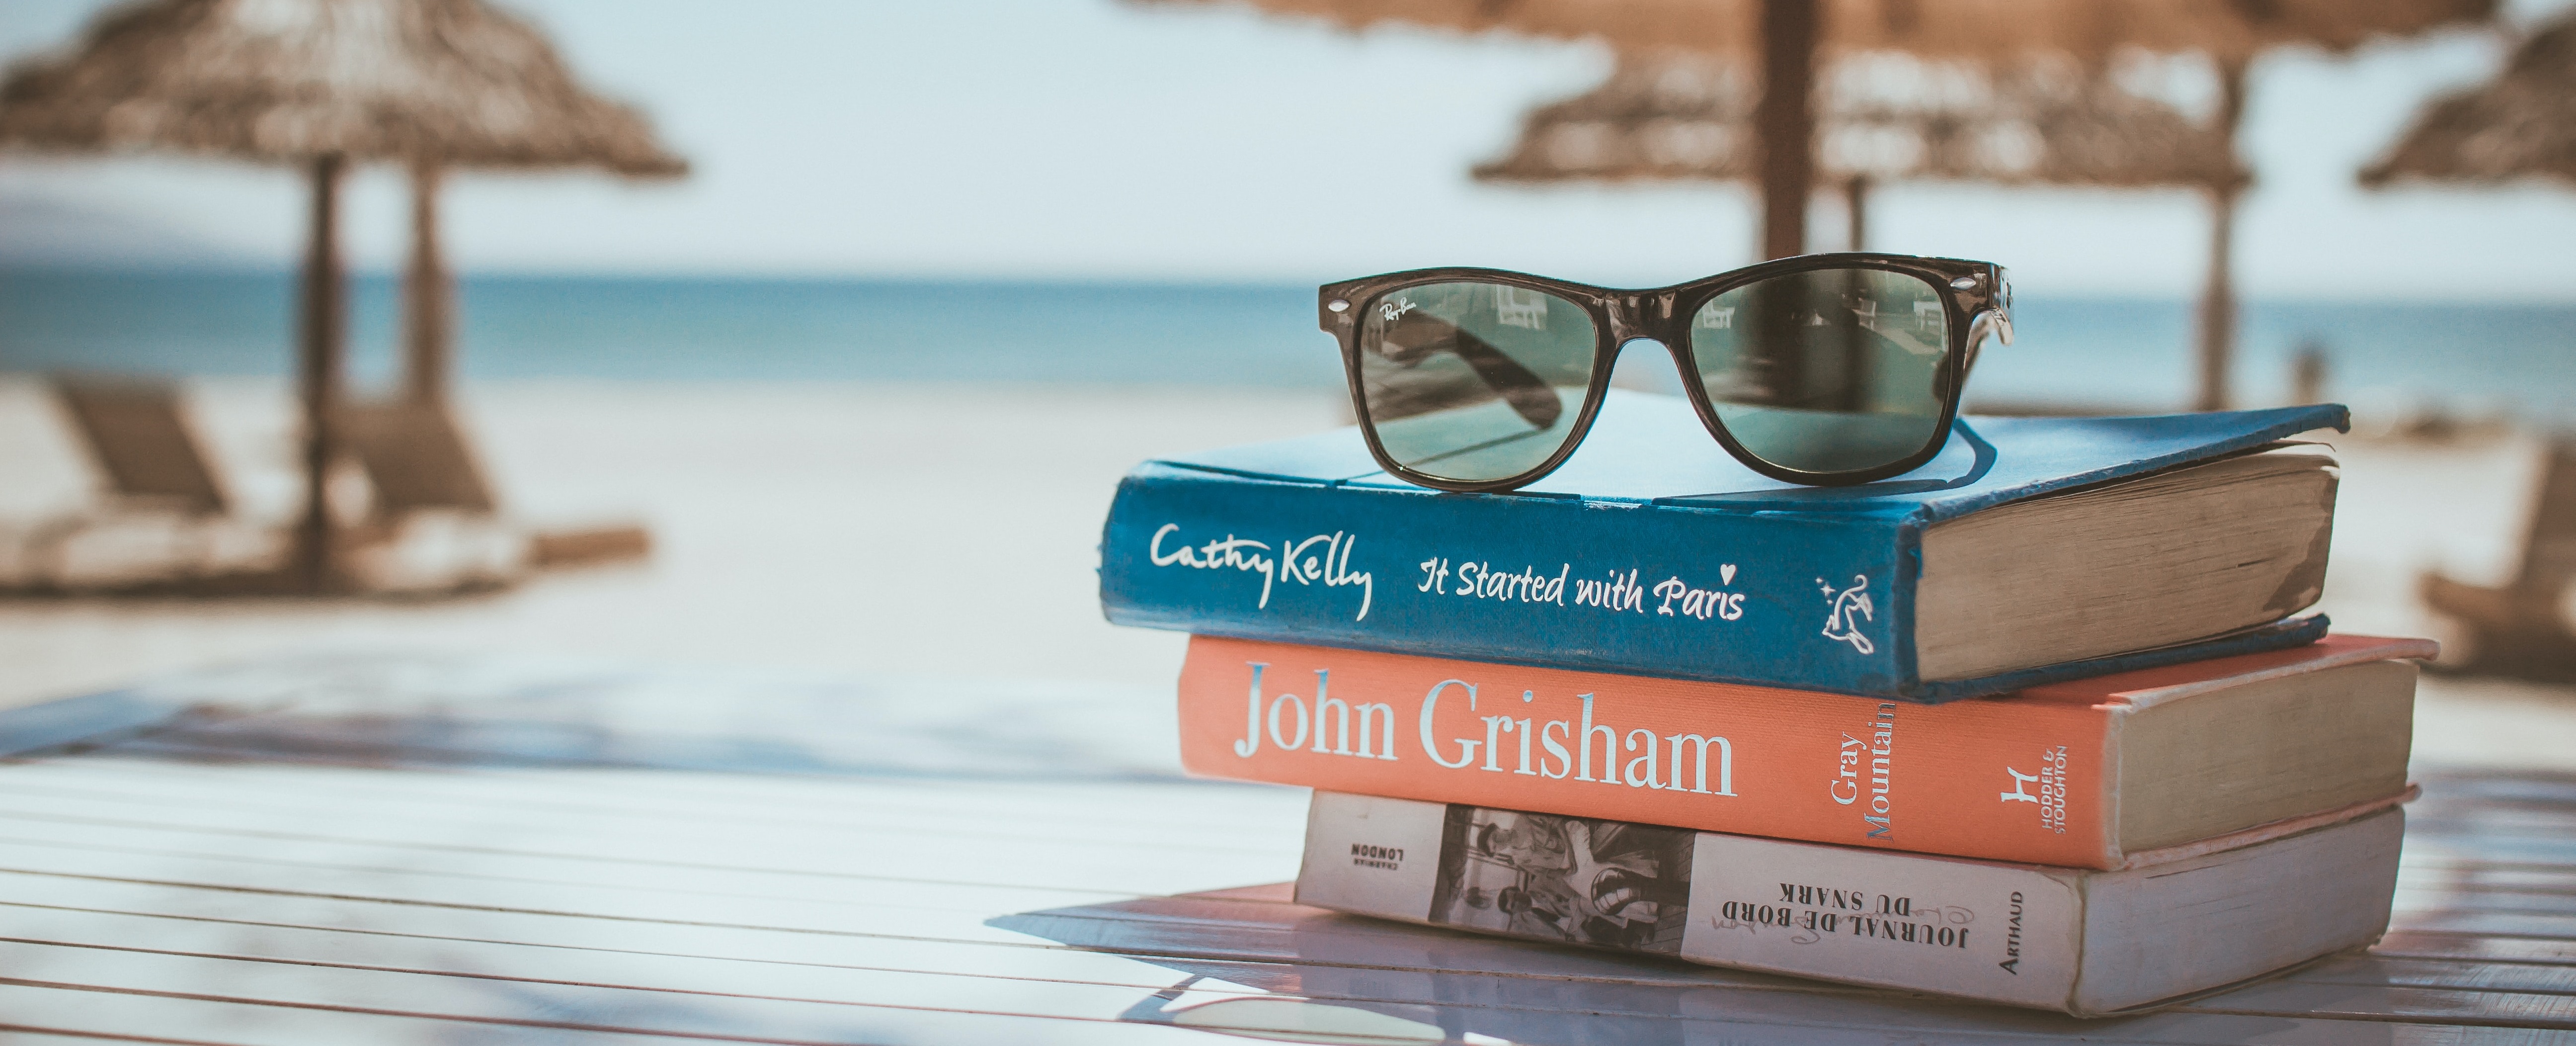 a beach scene featuring sunglasses atop a stack of books in the foreground